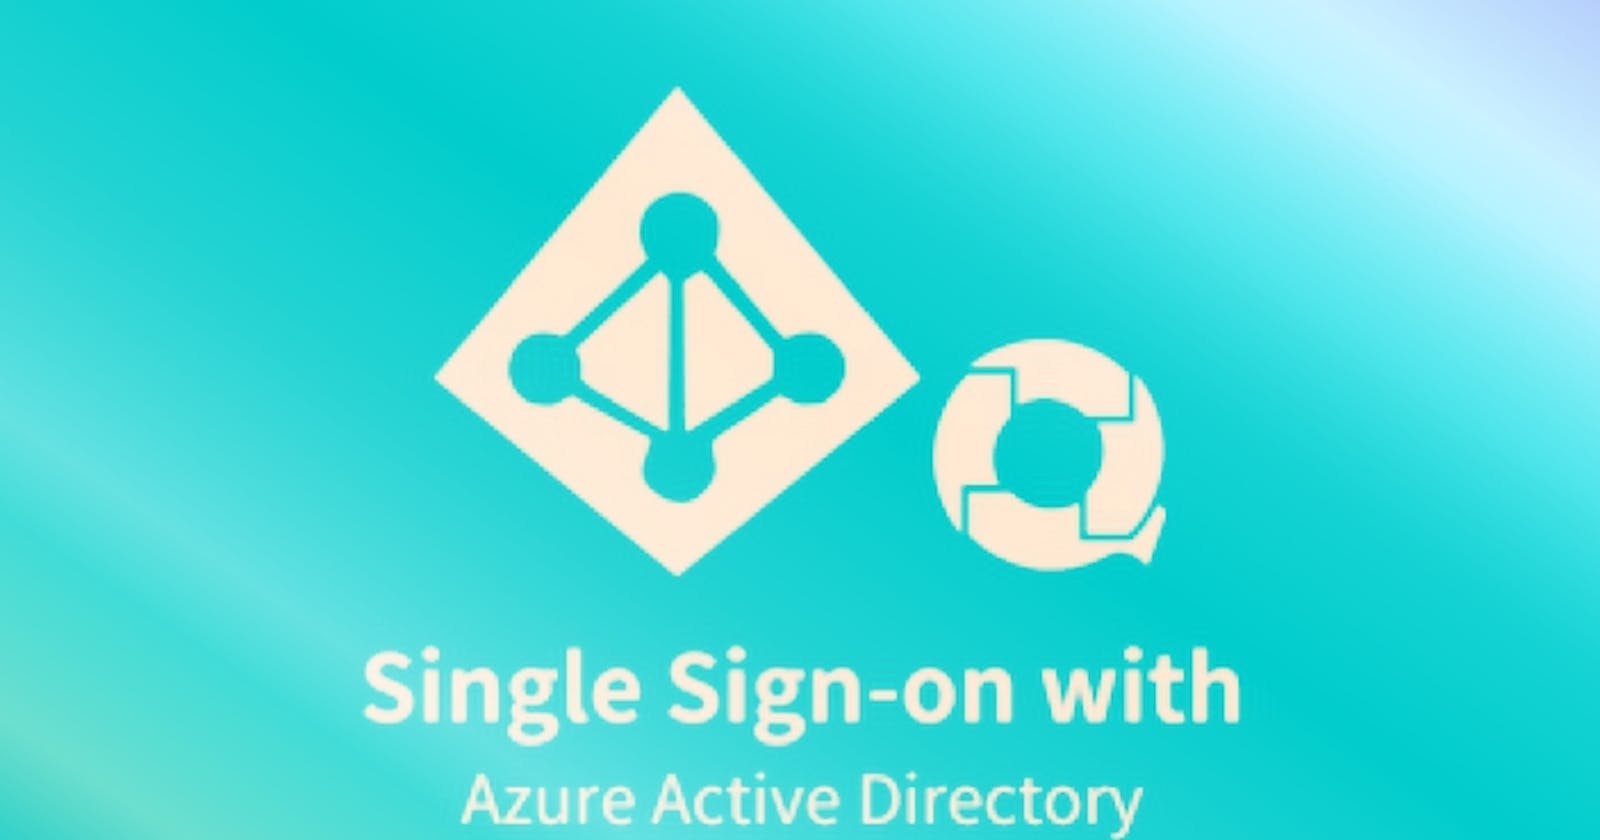 Streamlining Access: A Deep Dive into Single Sign-On on Azure